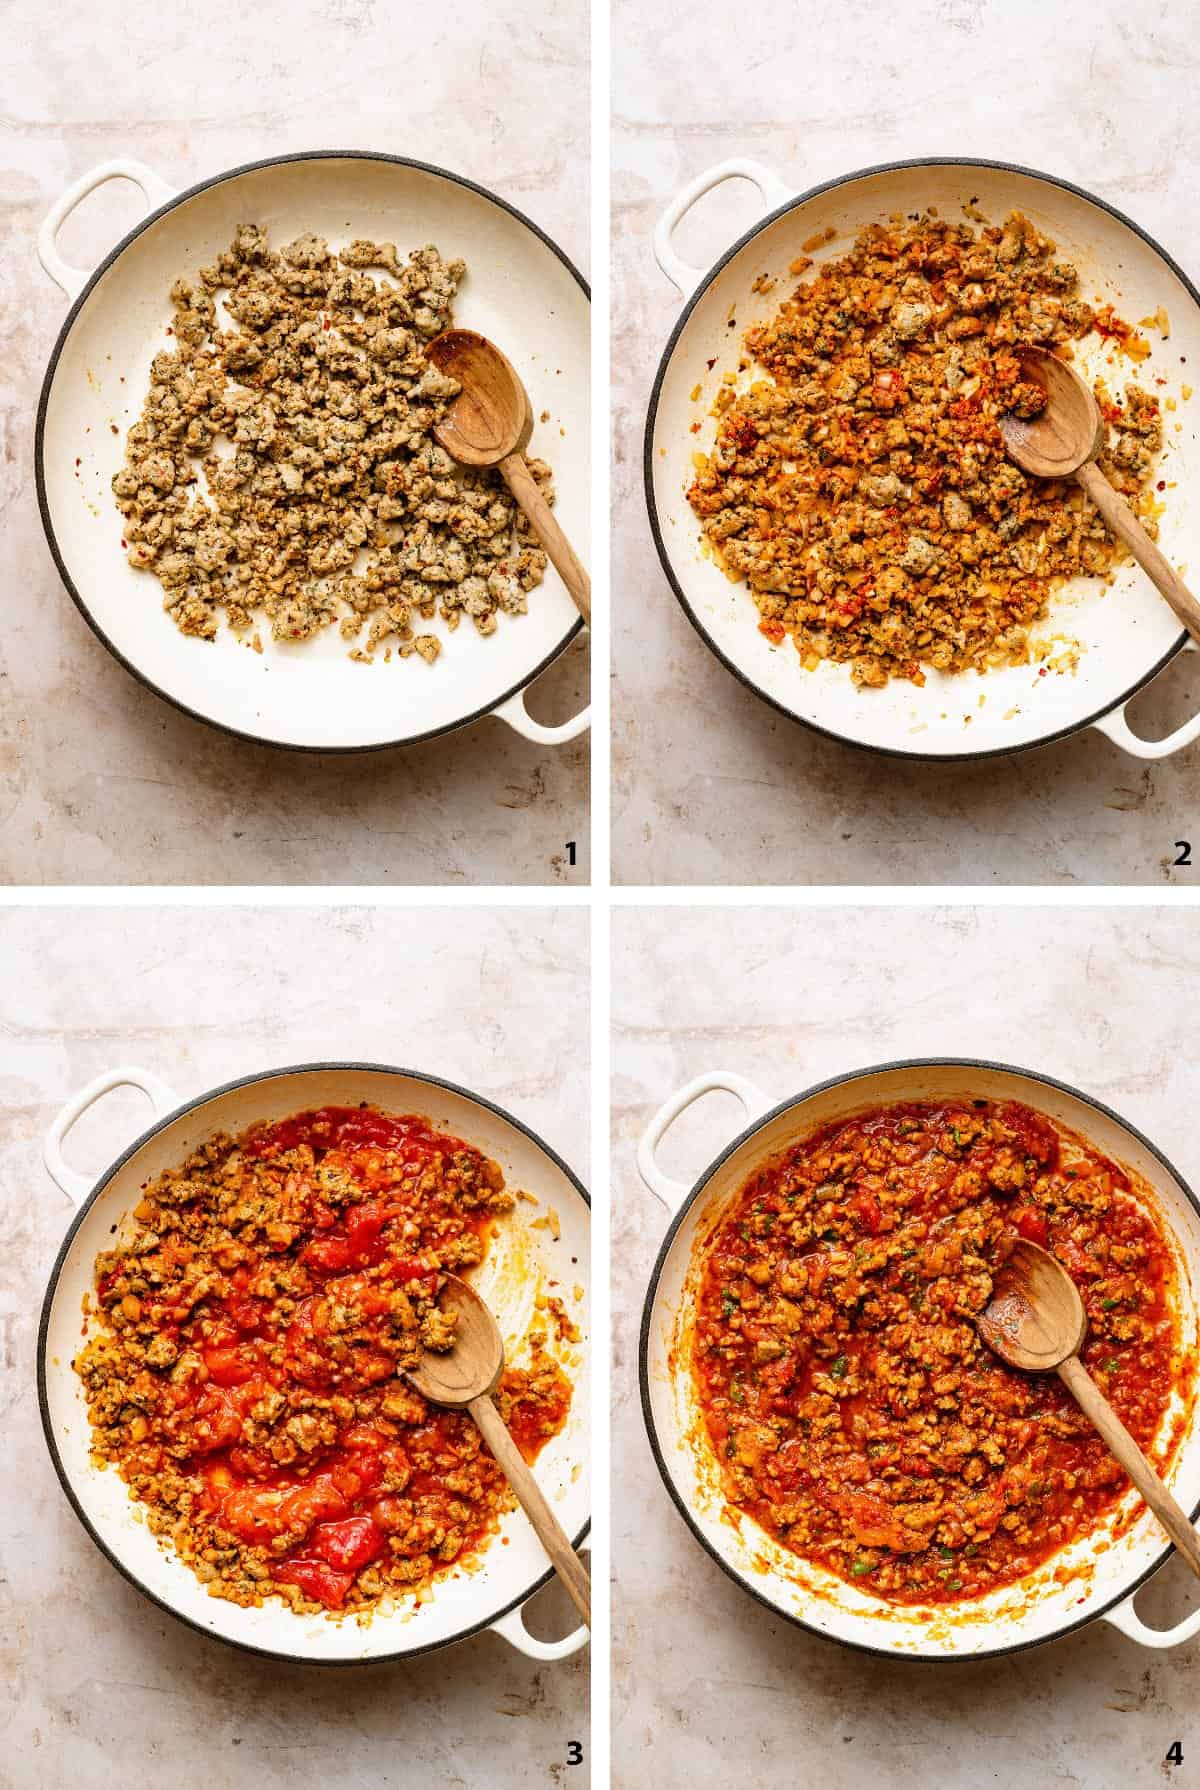 Process of creating the sausage ragu in a large skillet with a spoon.